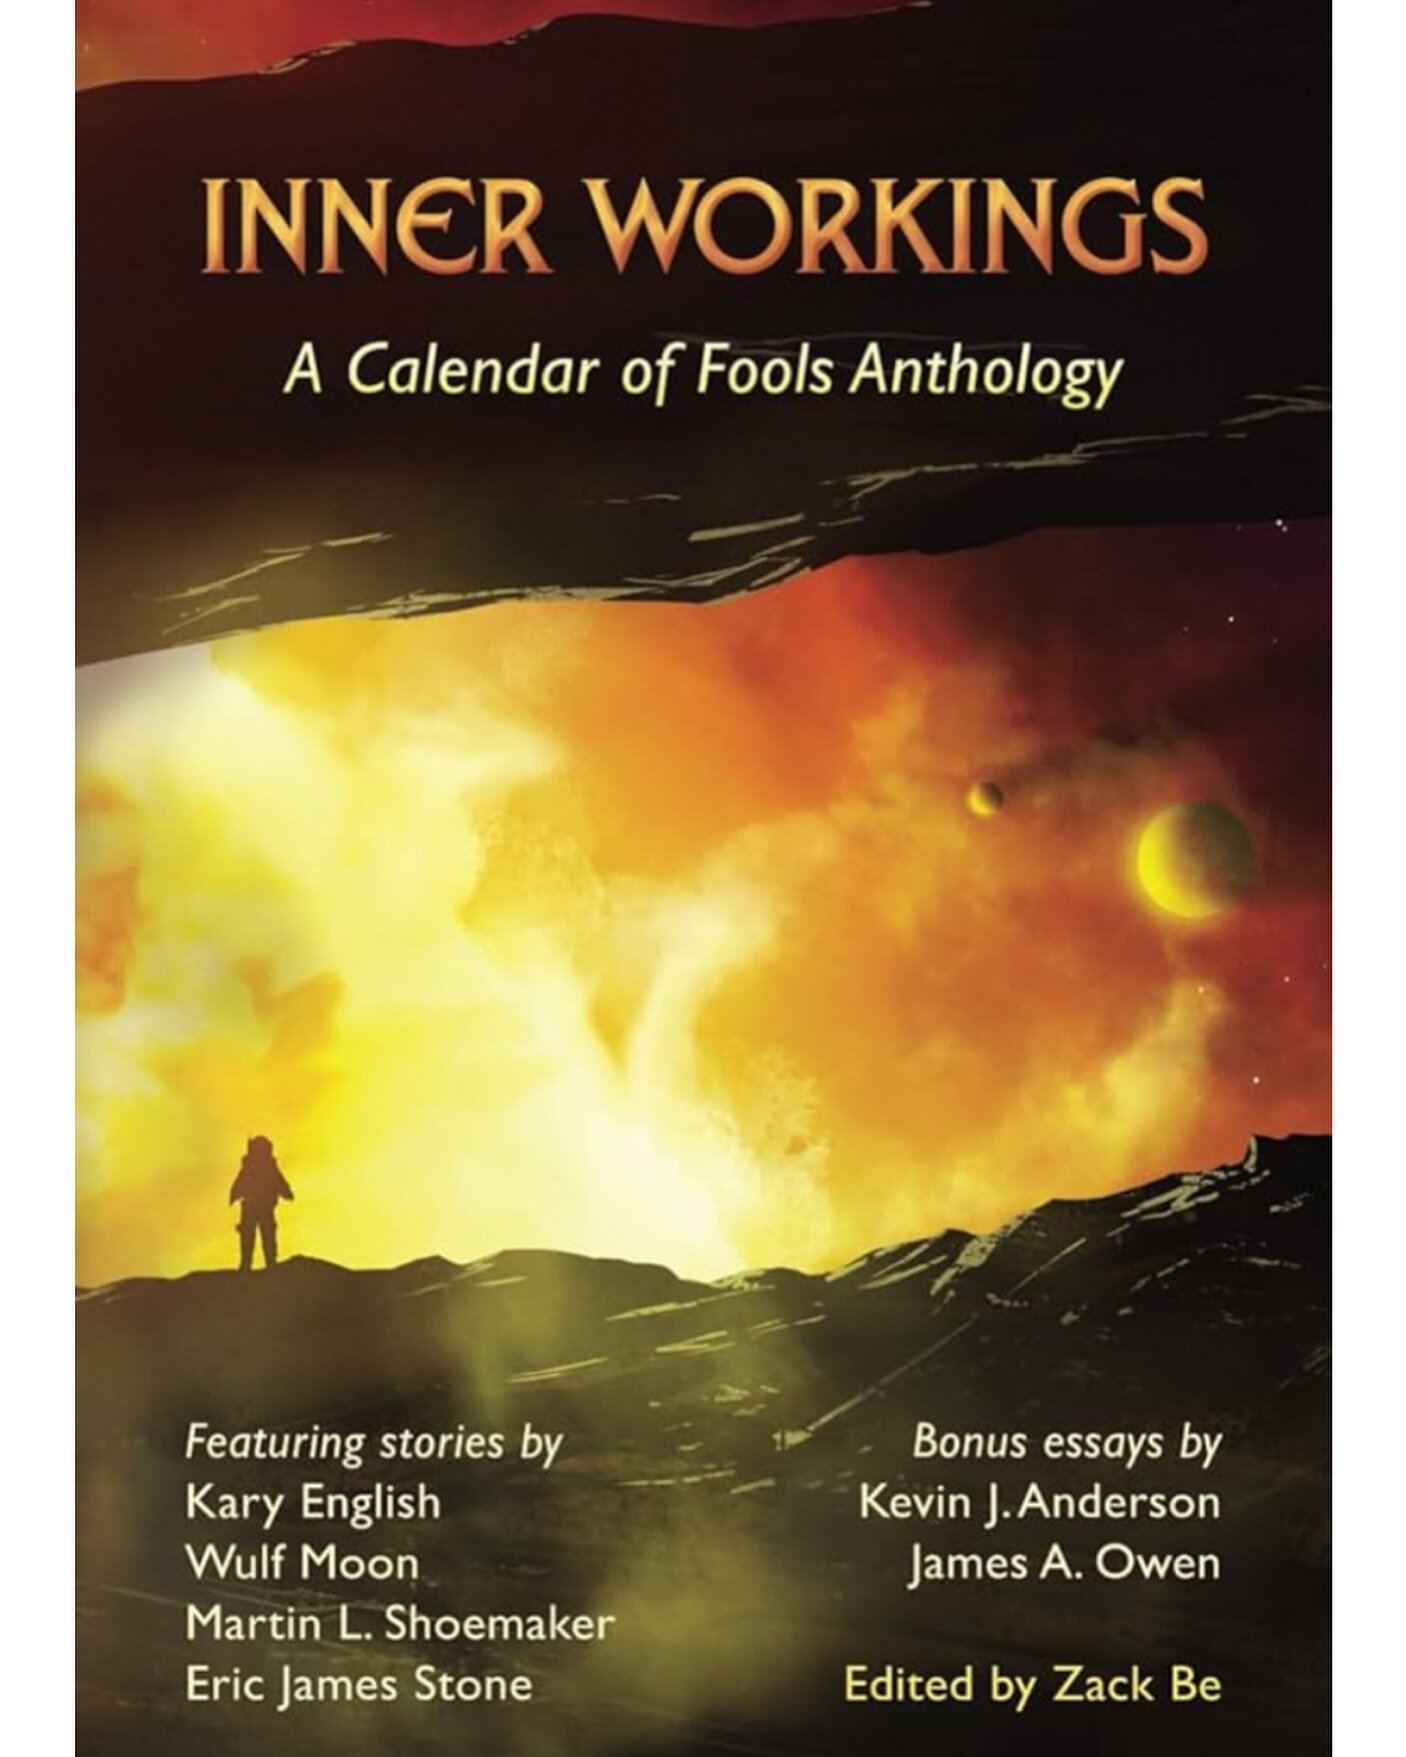 This is HUGE.
Today we finally release INNER WORKINGS: A Calendar of Fools Anthology to the world! 16 SFF stories by award-winning authors, each with an attached writing craft essay by the authors revealing their secrets! This is my first time w/ an 